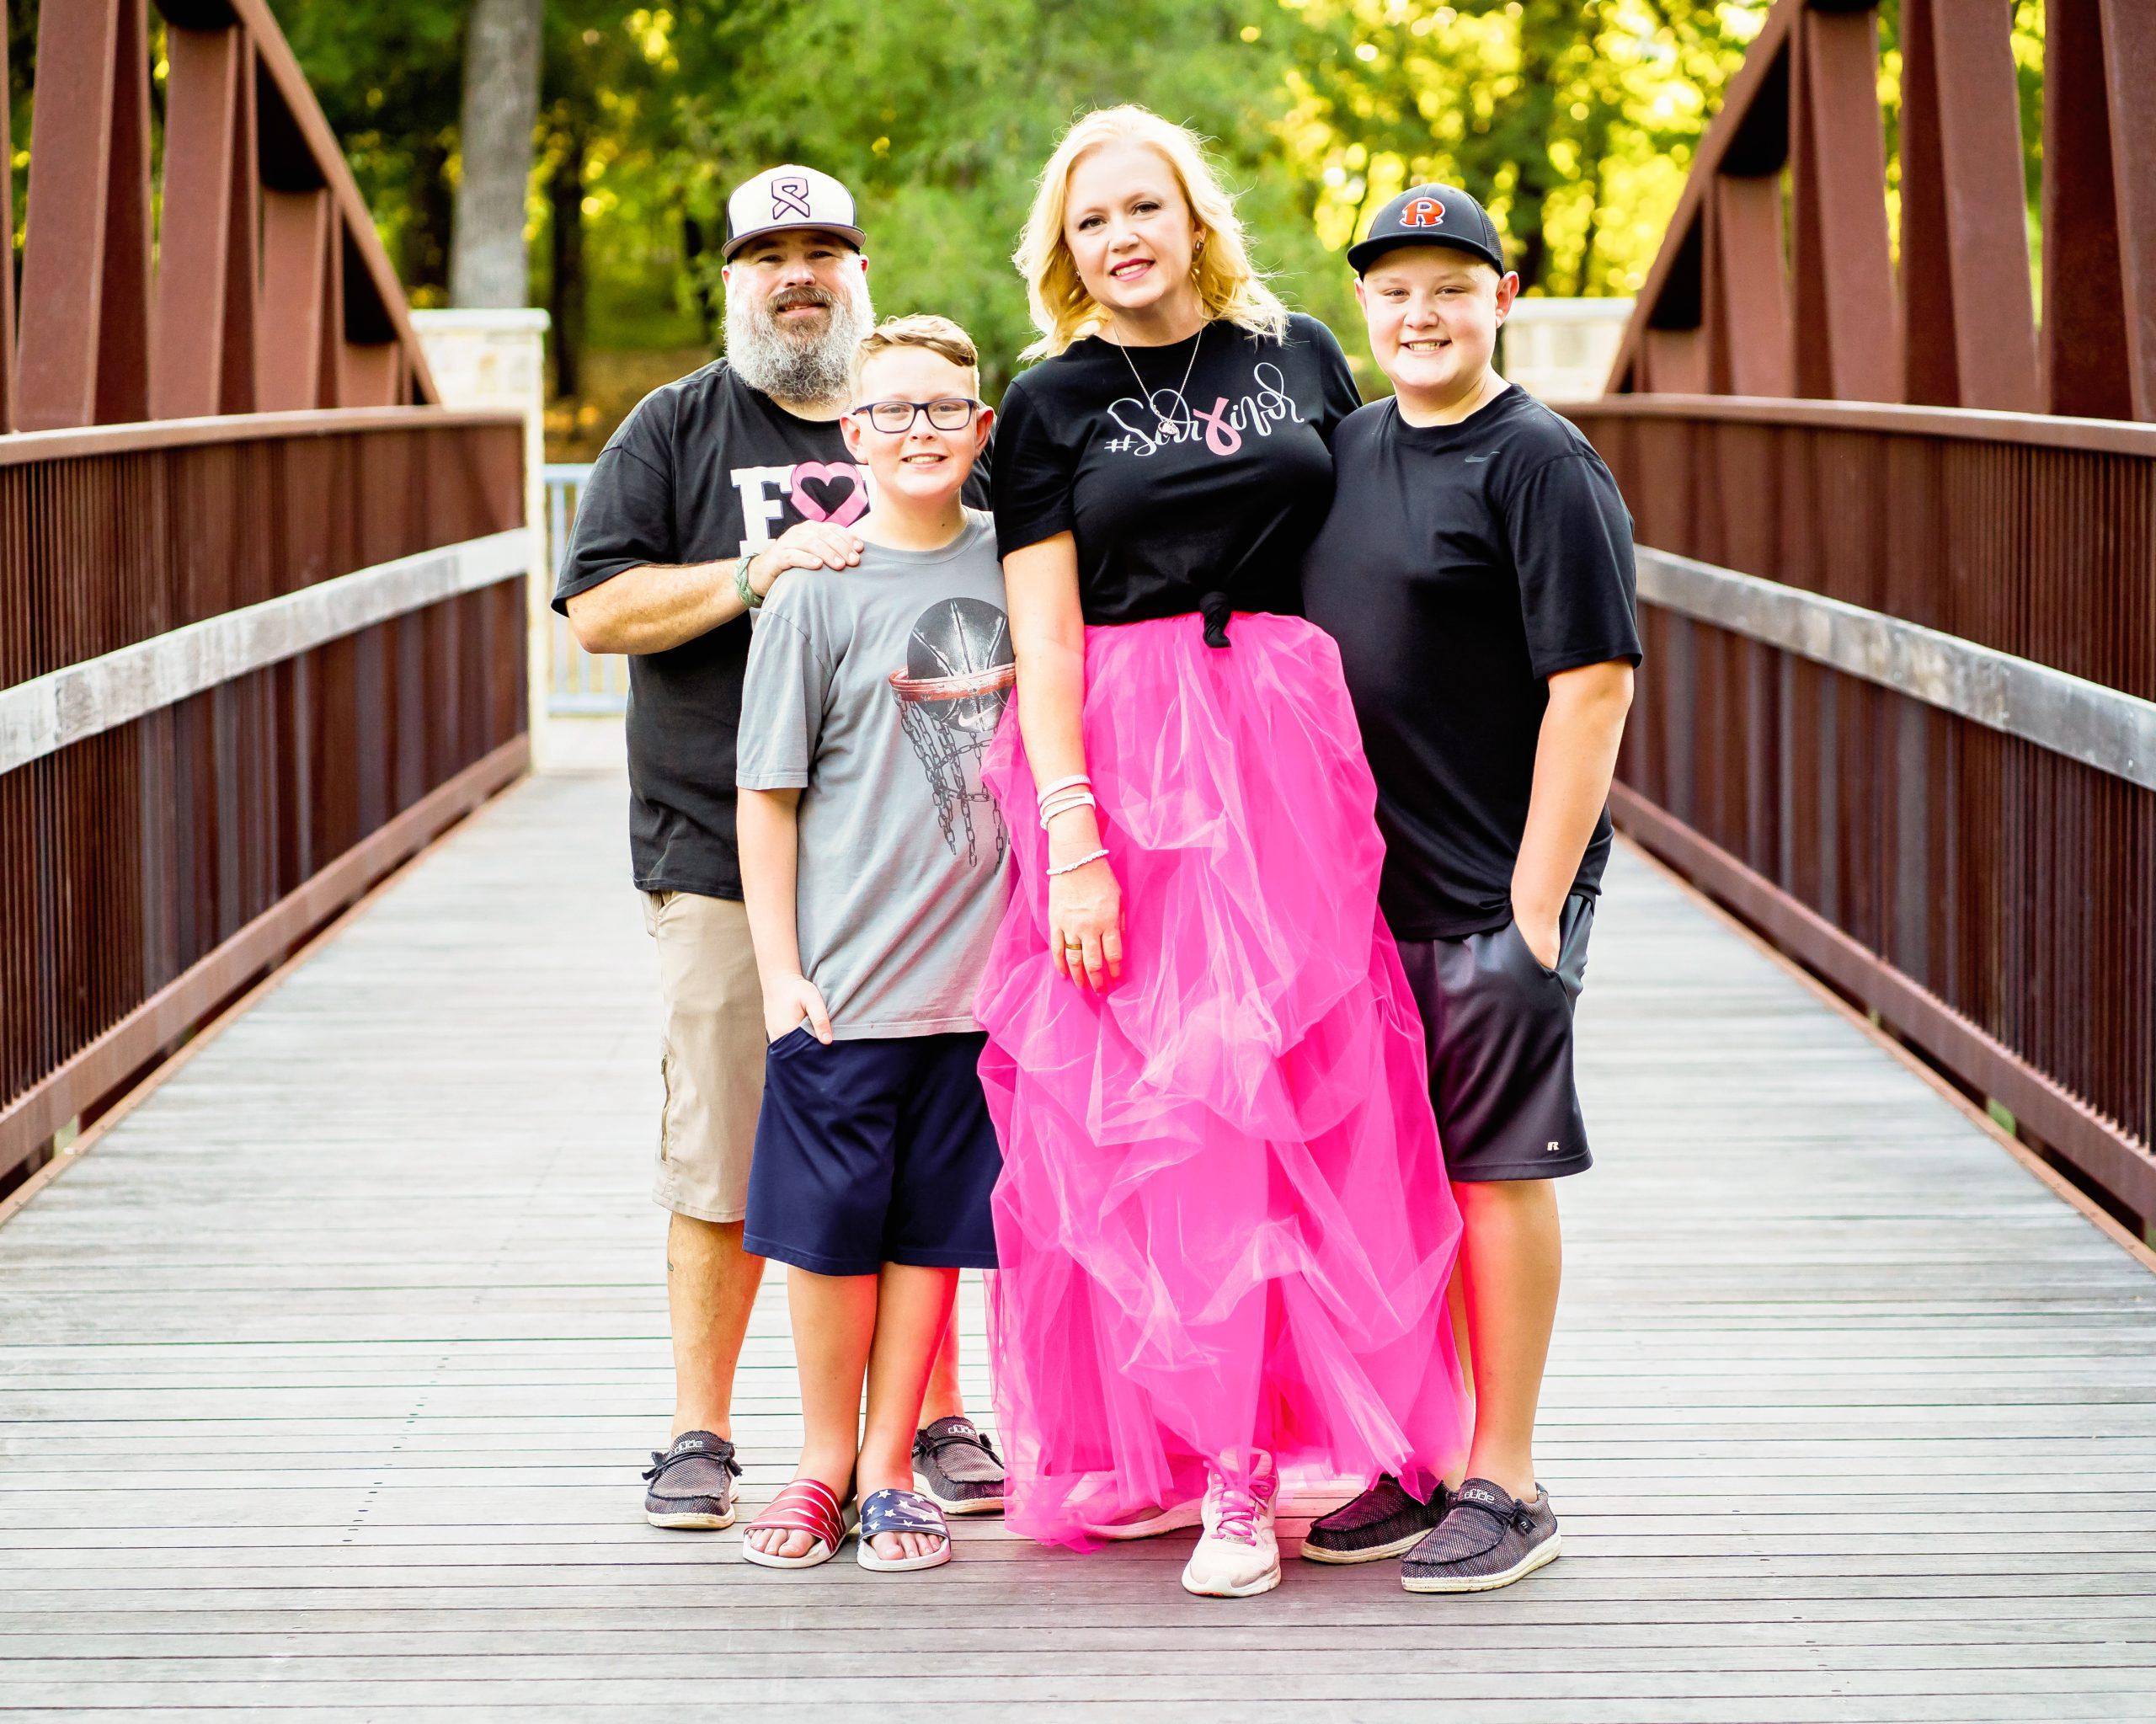 A breast cancer survivor and her family pose on a bridge.